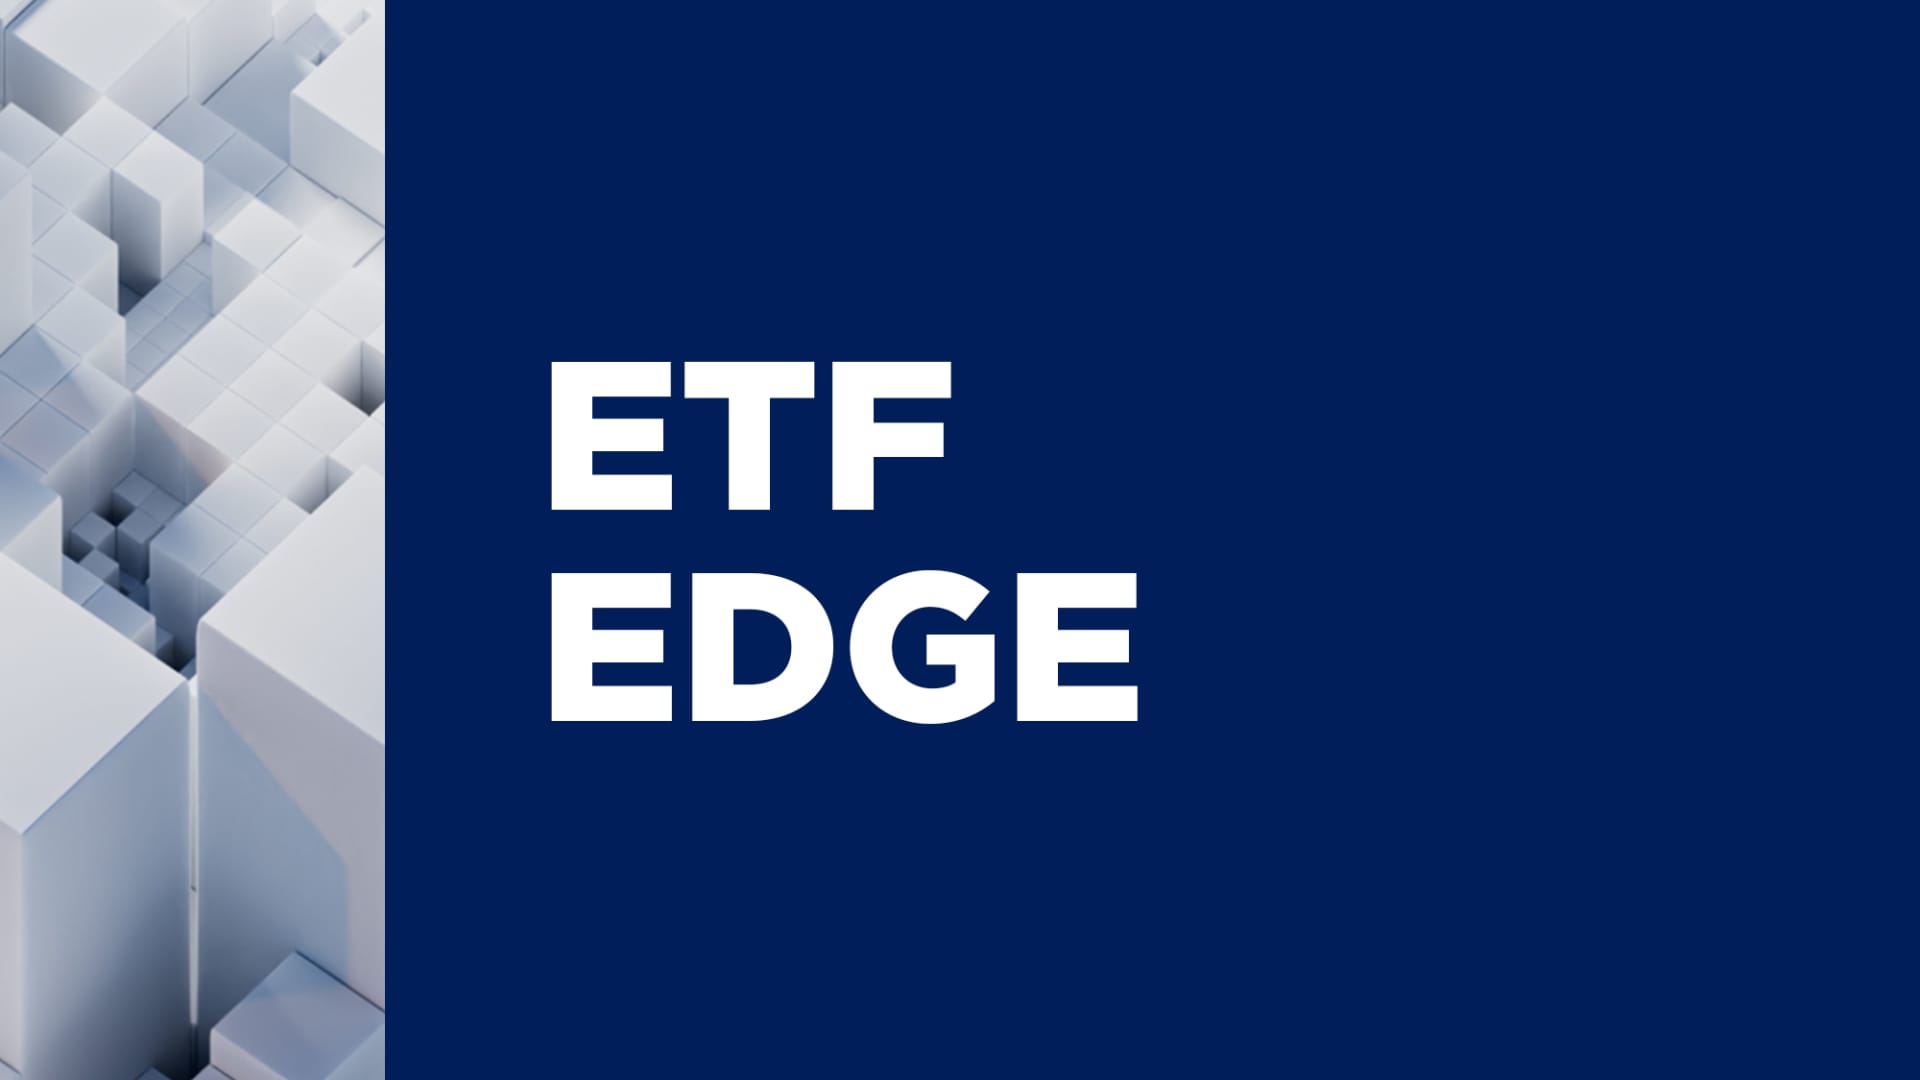 ETF Edge on investing in private tech companies [Video]